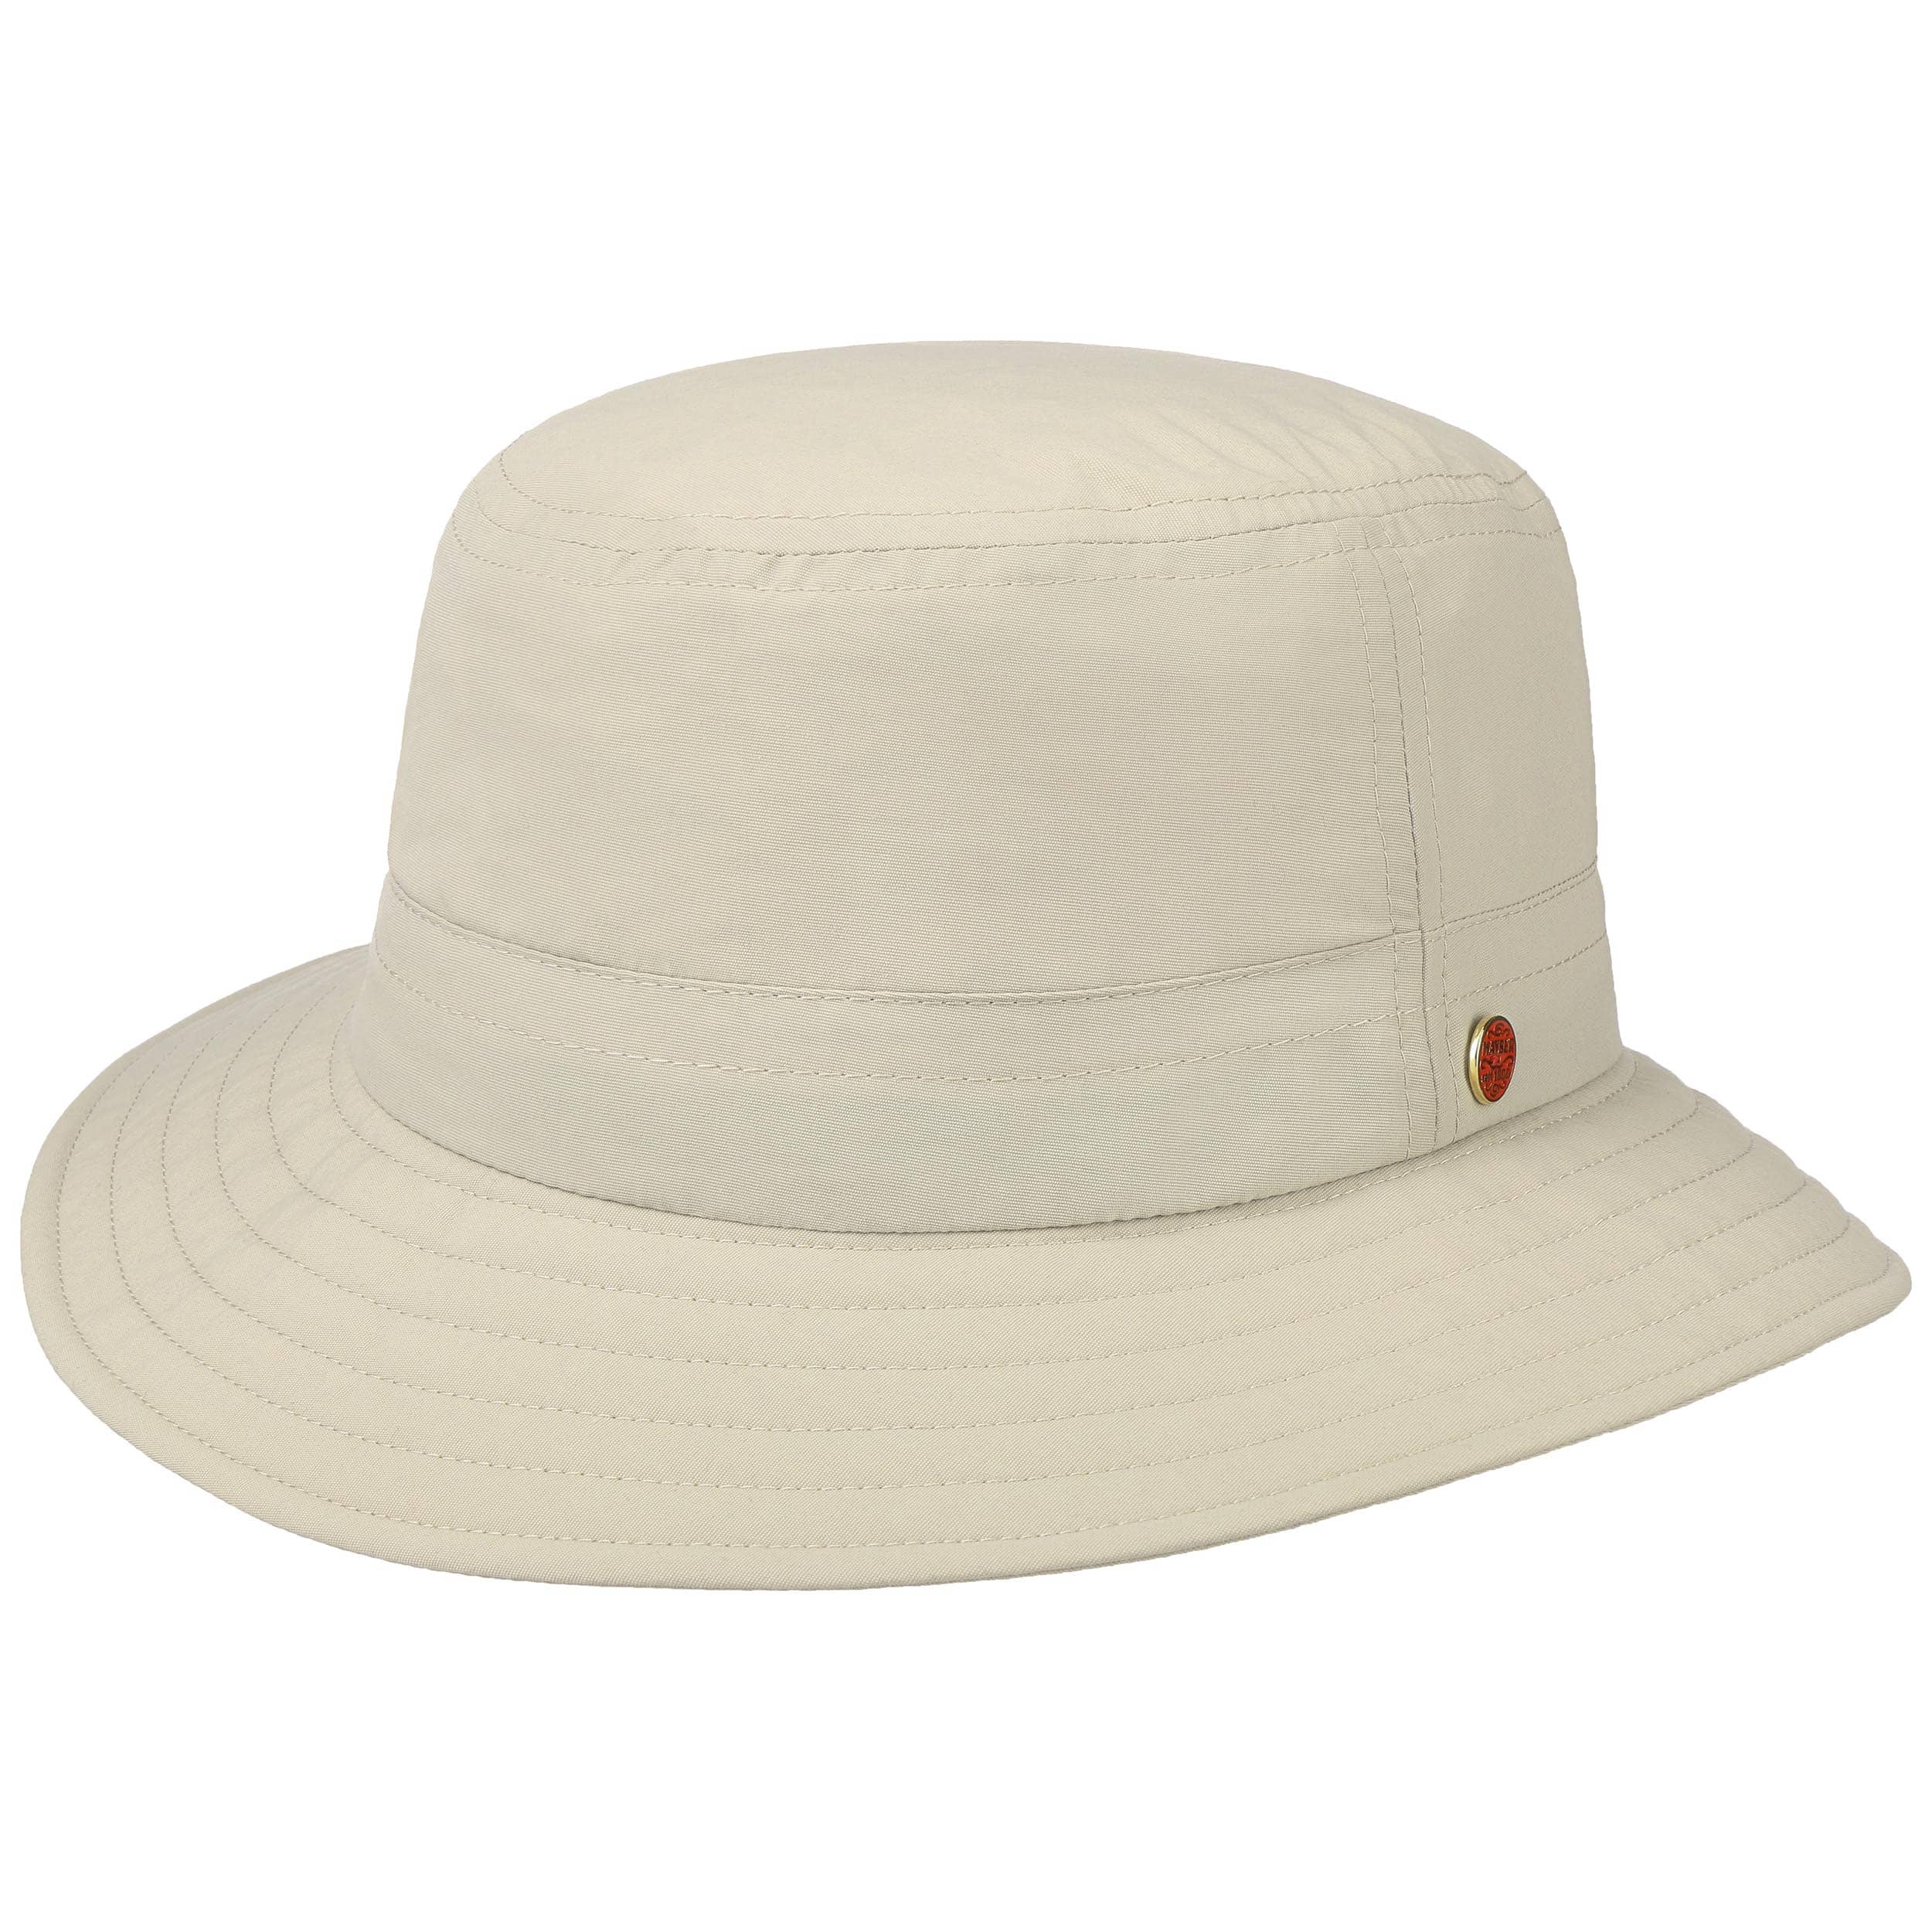 Protection UV Sun by 72,95 € Mayser Hat -